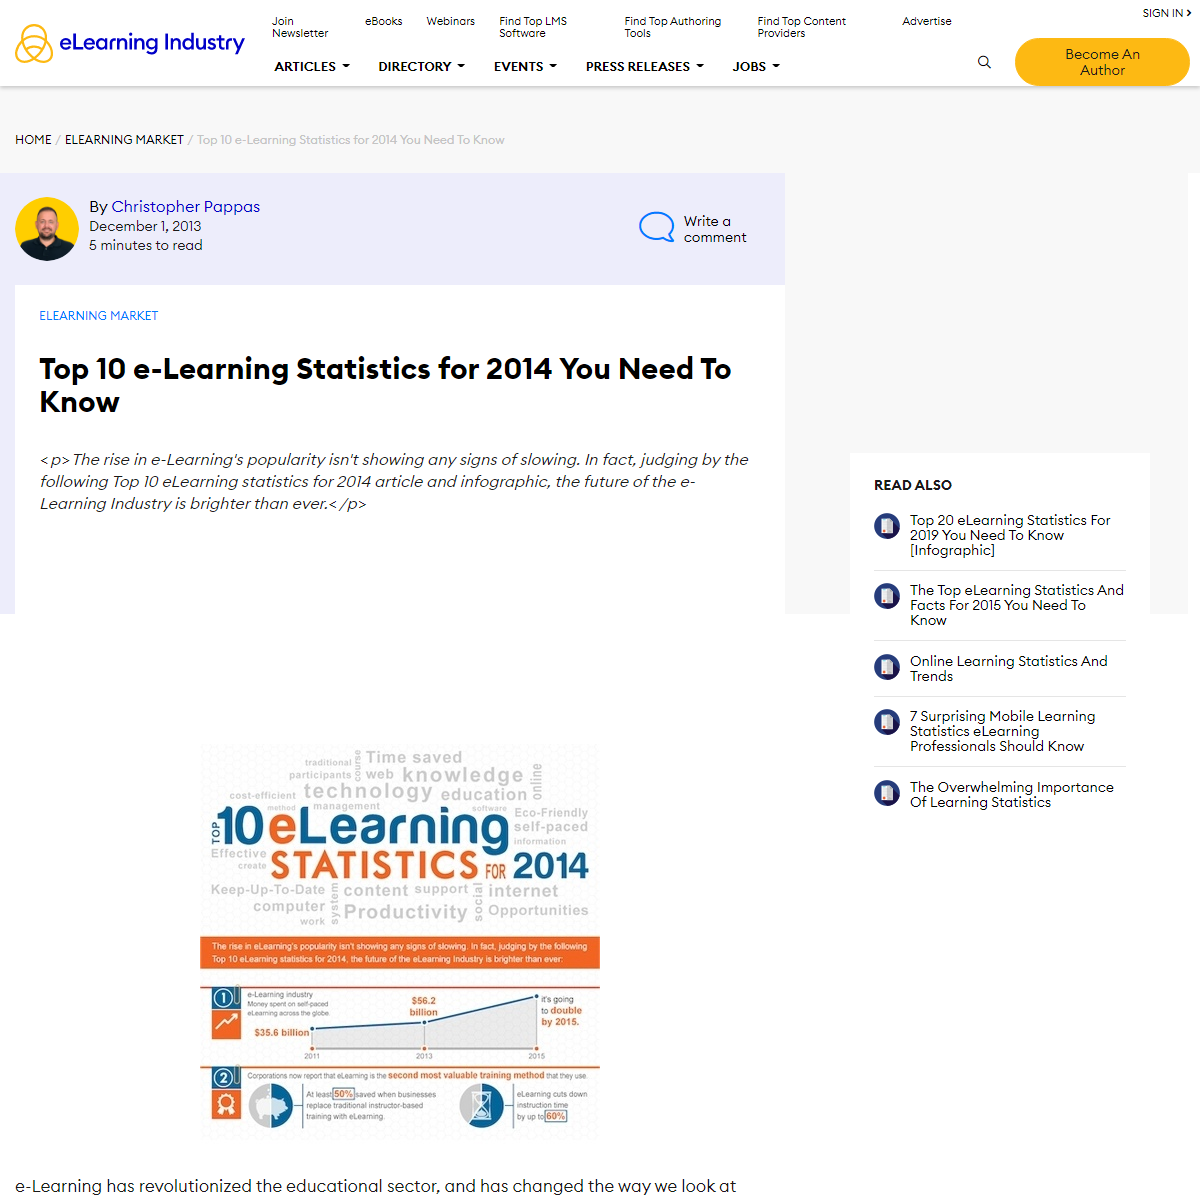 A complete backup of https://elearningindustry.com/top-10-e-learning-statistics-for-2014-you-need-to-know